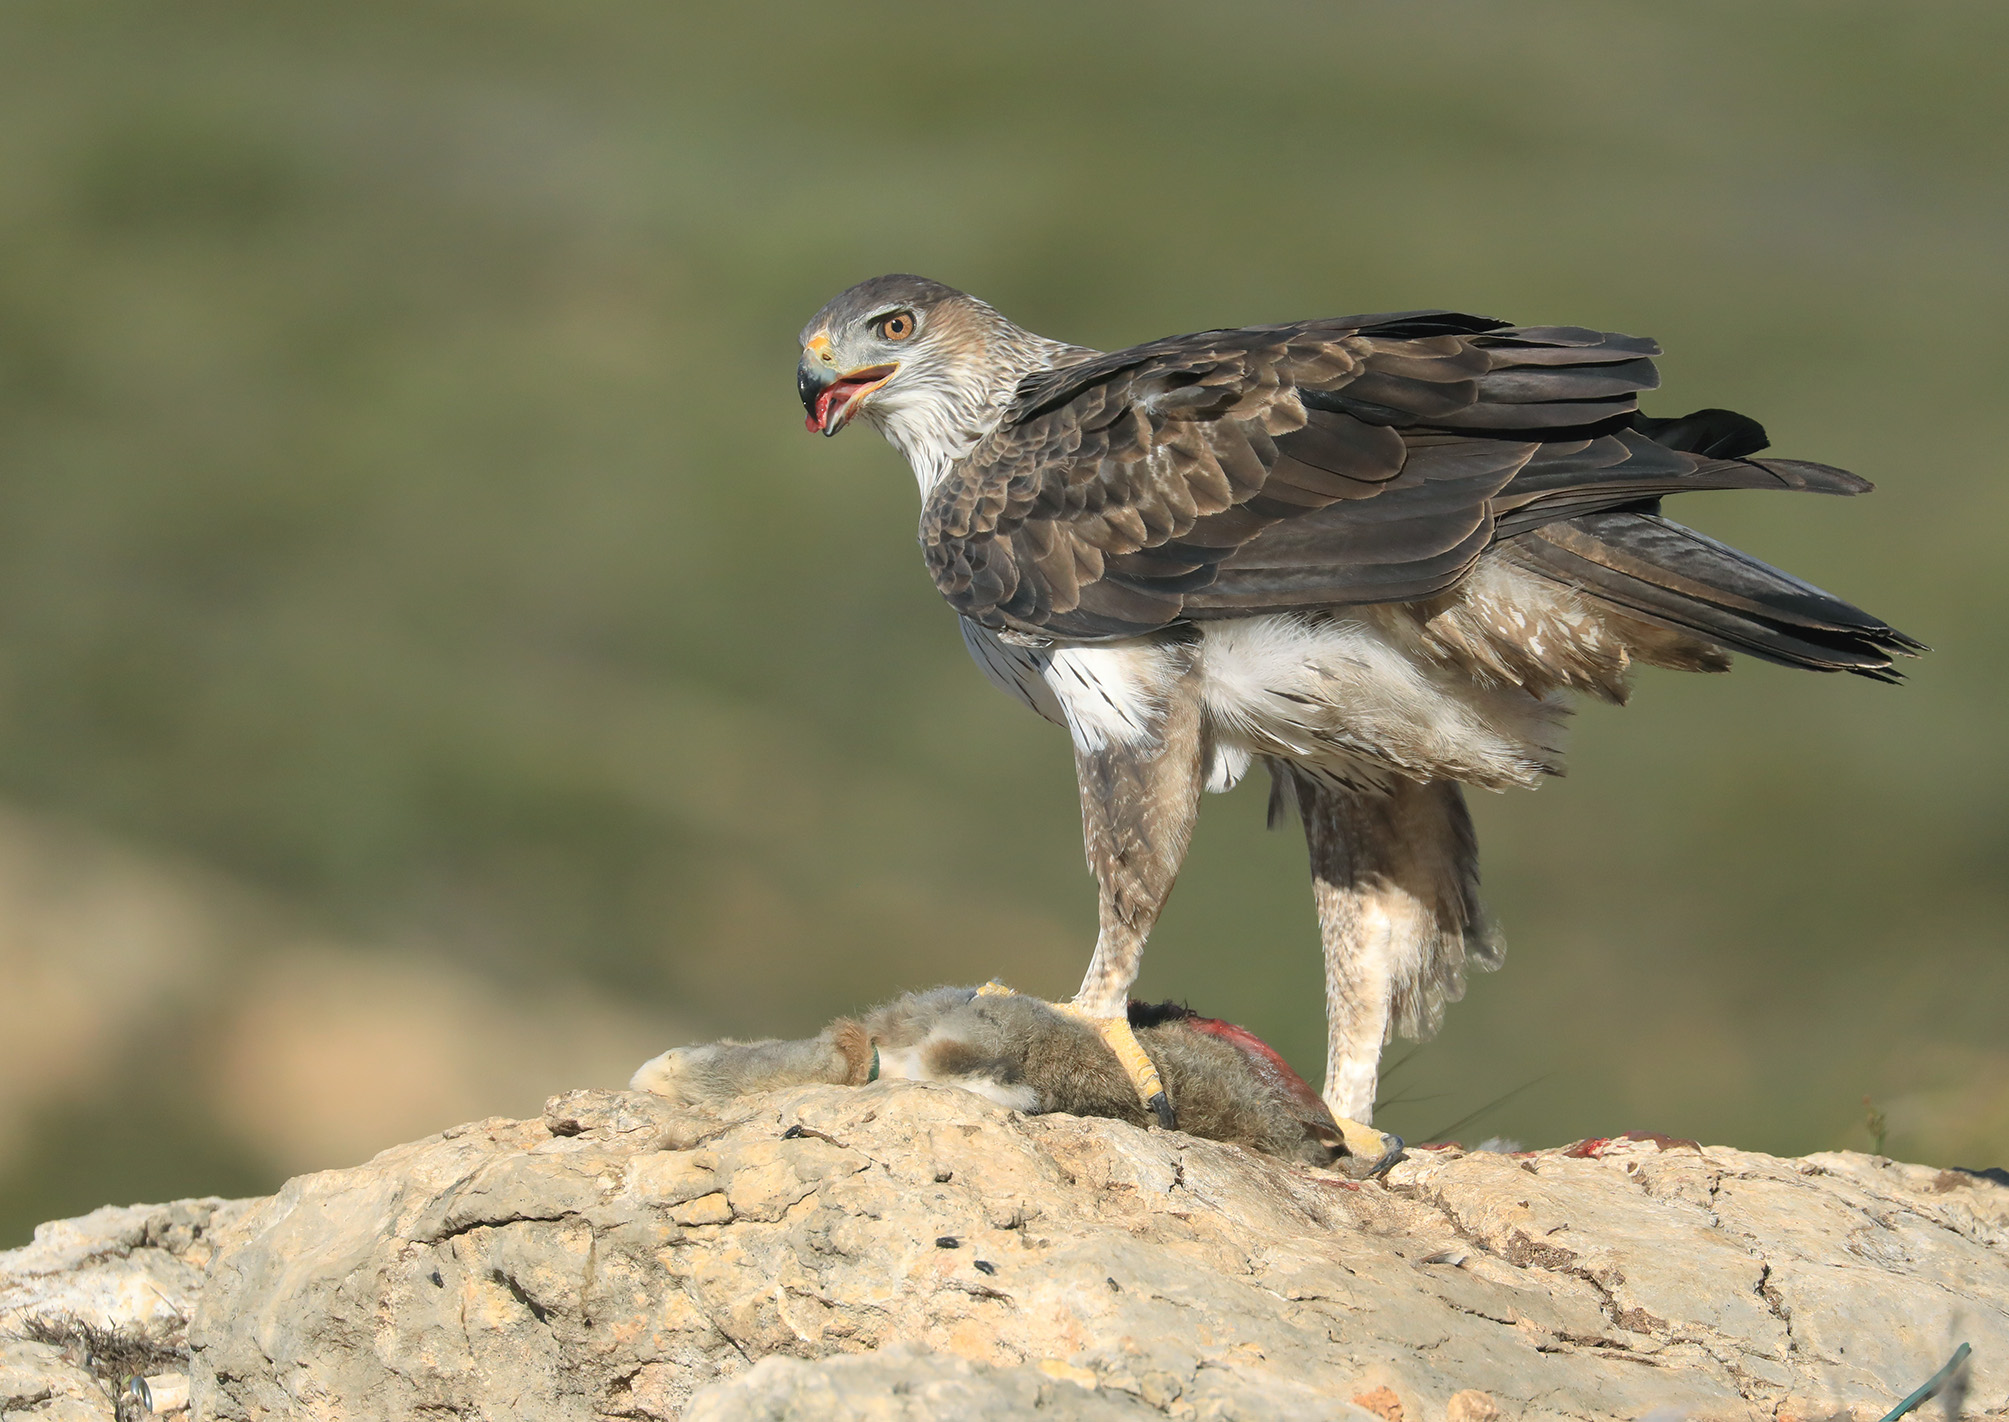 the meal of the raptor, eagle of the bonelli...